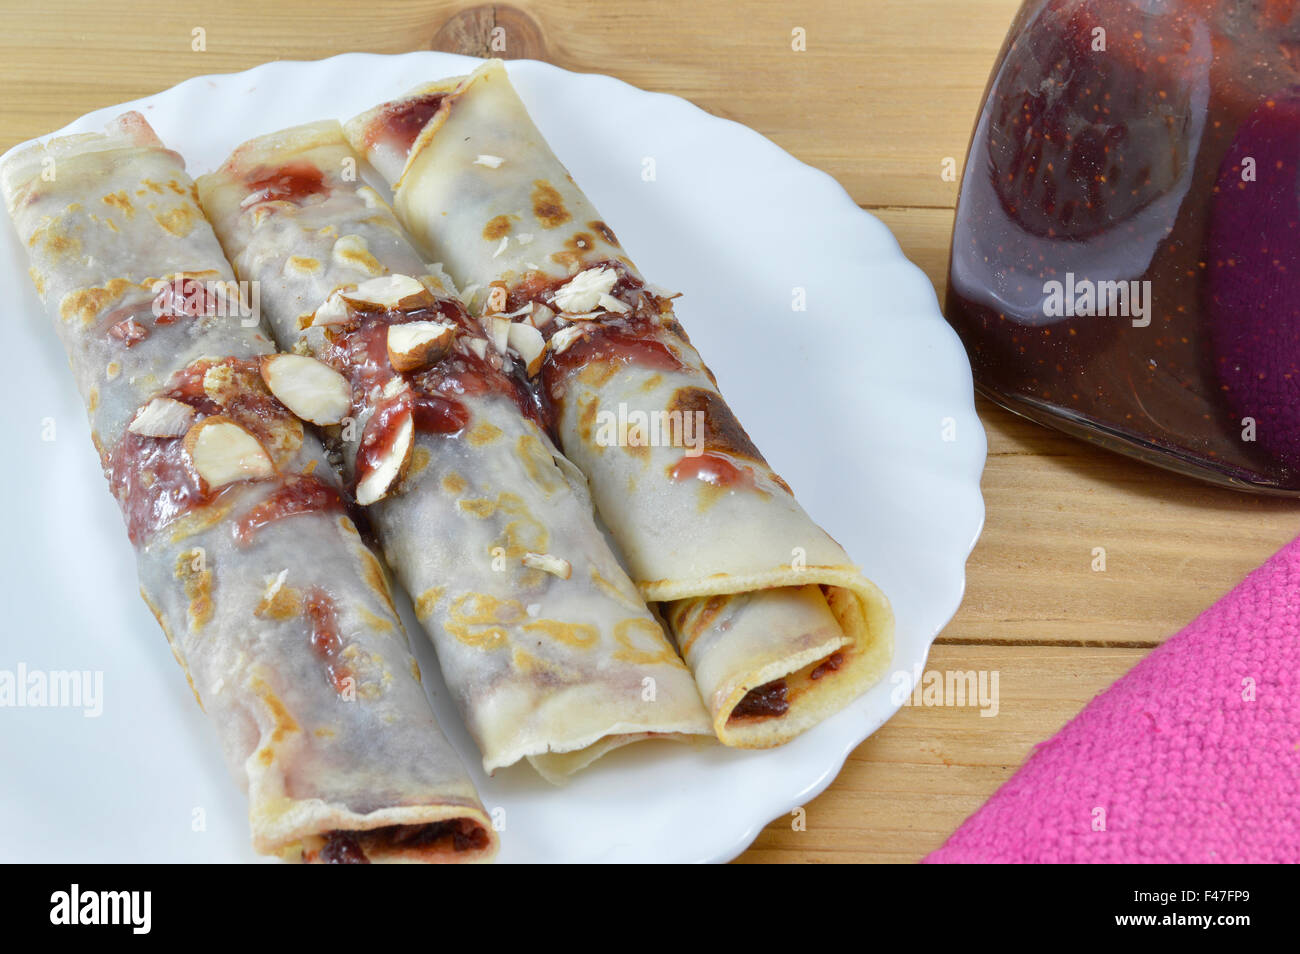 Sweet pancakes with strawberry jam and hazelnuts served on the plate Stock Photo